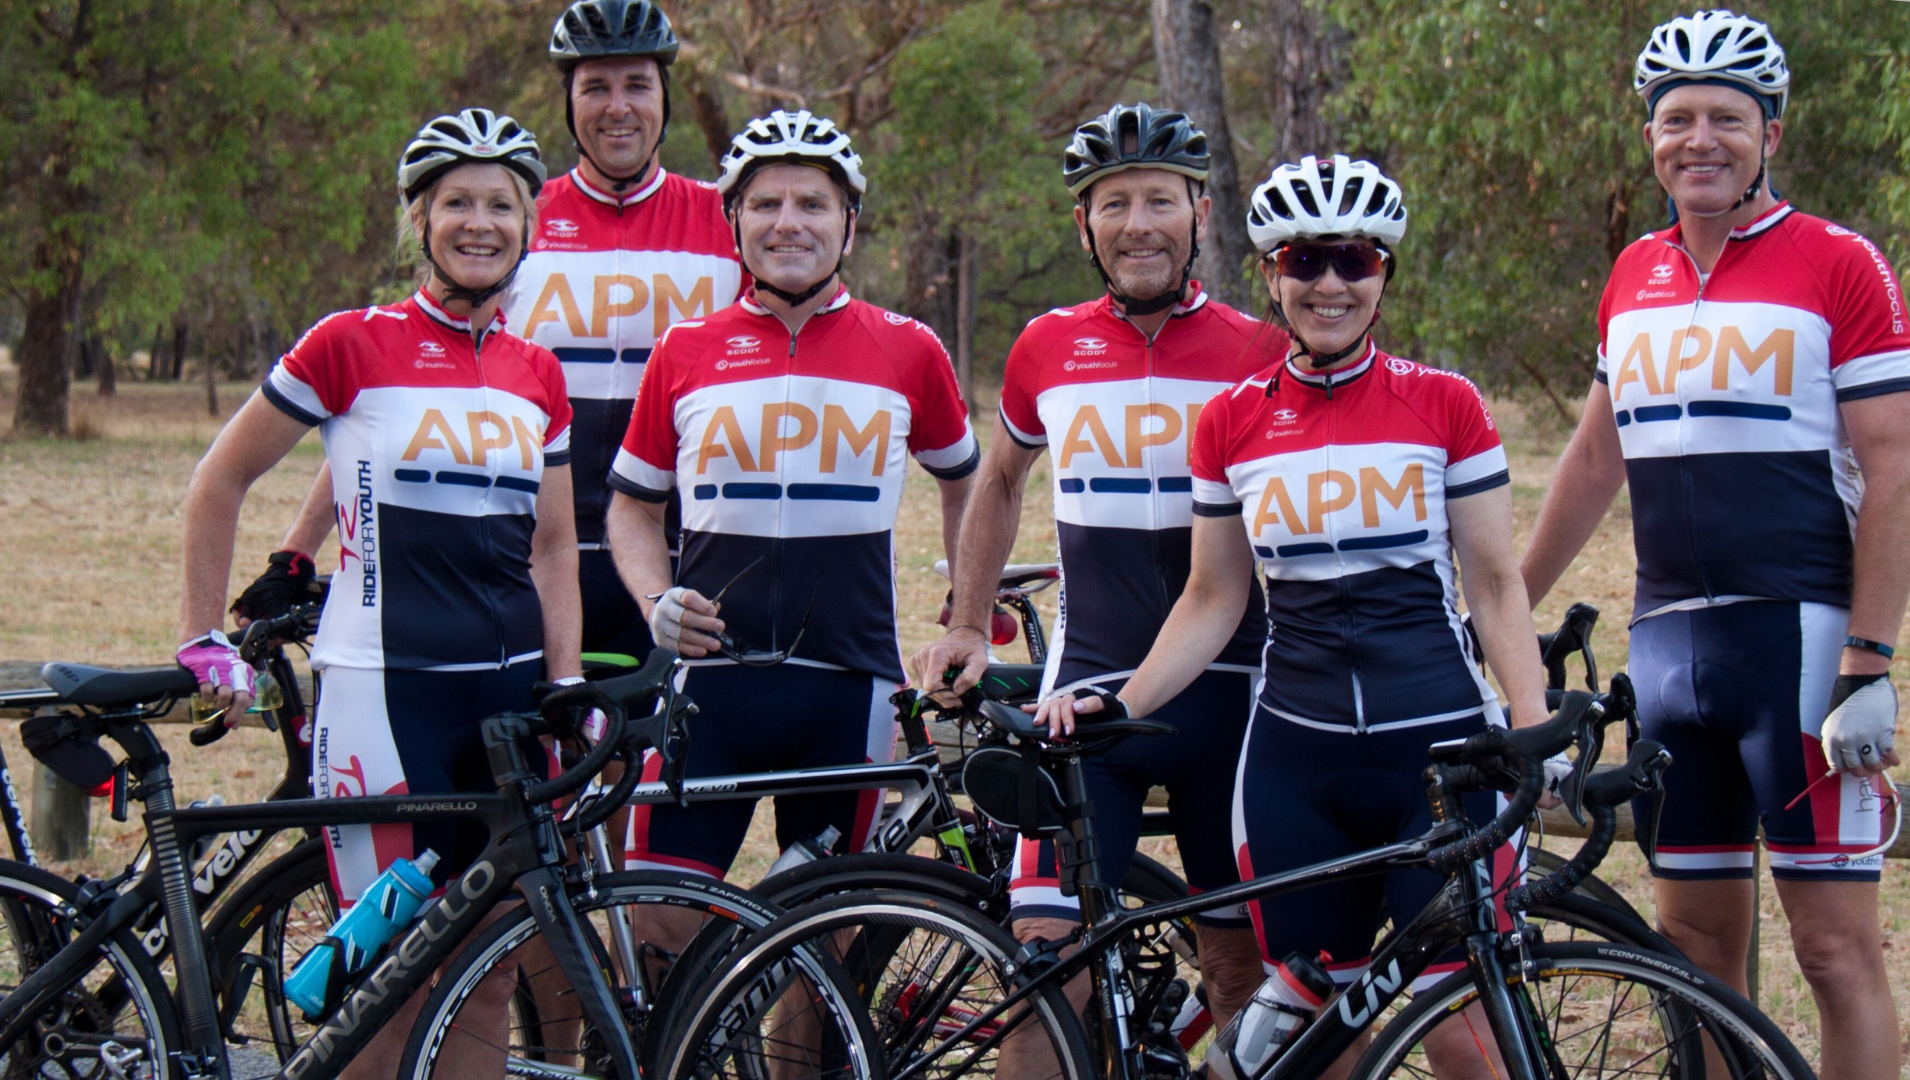 APM Employable Me CEO Fiona Kalaf is pictured with the Hawaiian cycling team